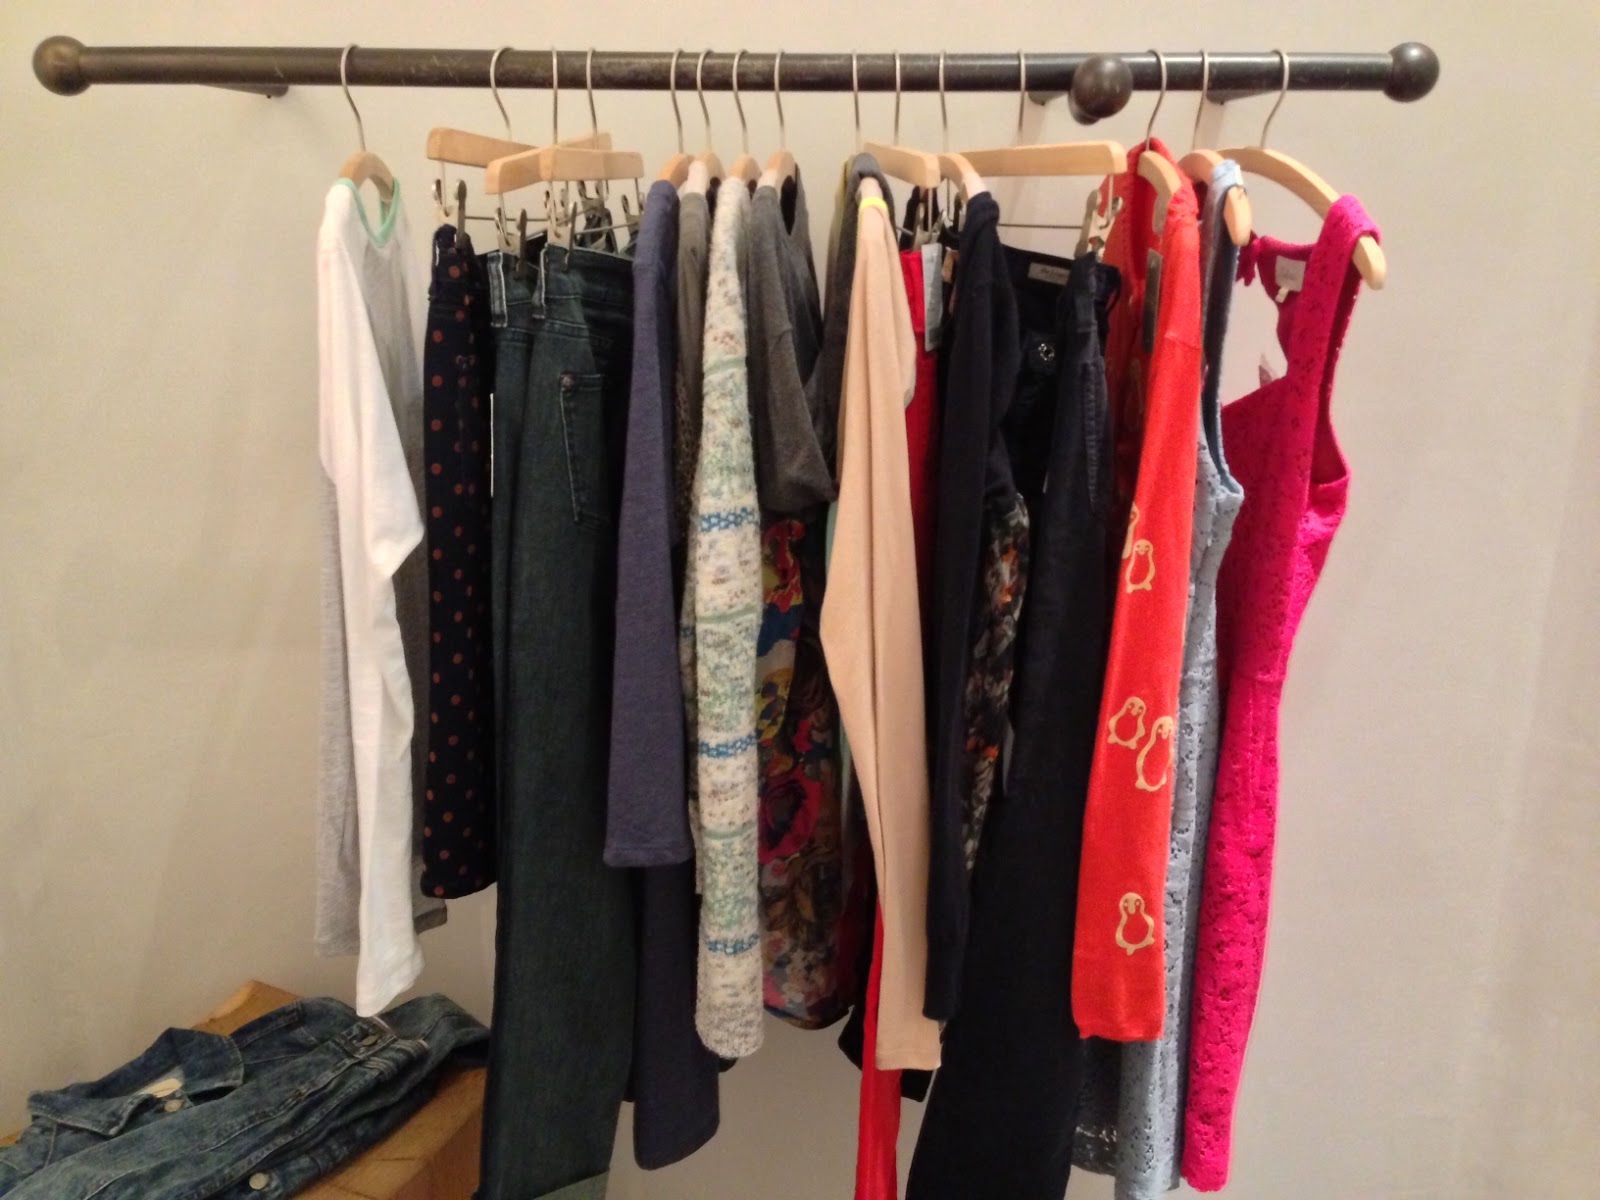 Effortlessly with roxy: Guest post by Nikki: Anthropologie sale room tales